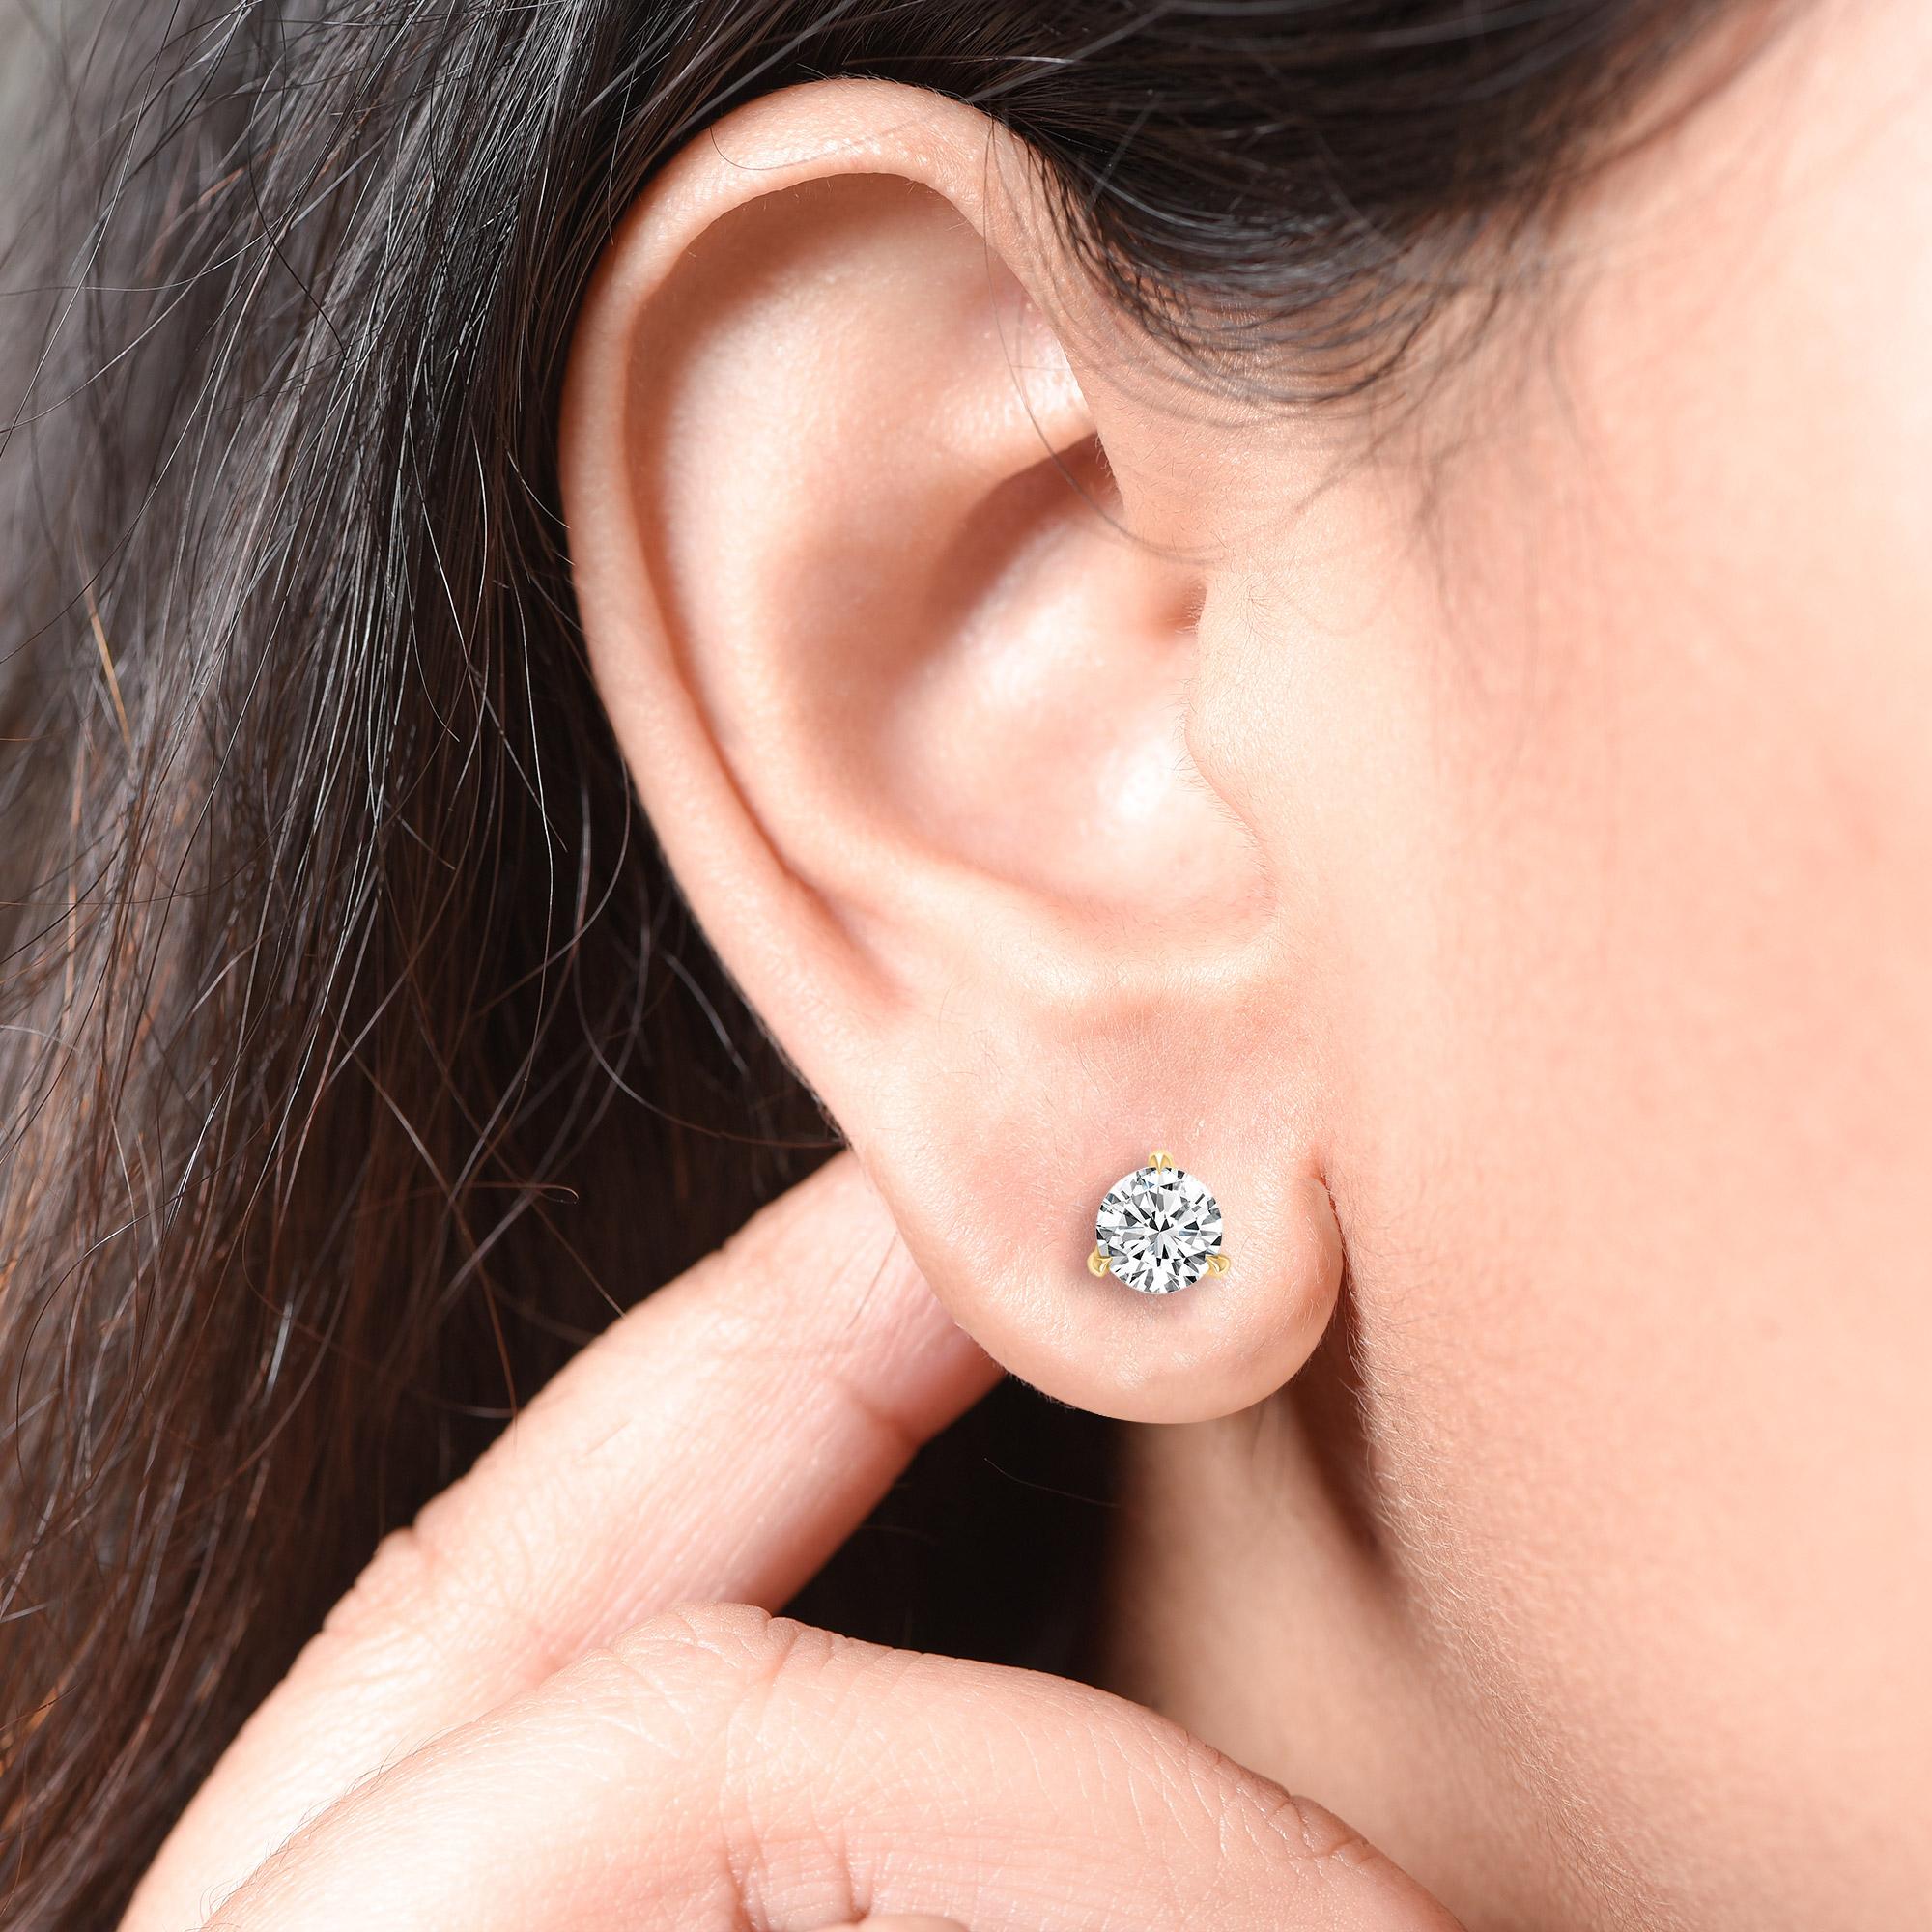 These GIA certified classic diamond studs showcase a pair of perfectly matched diamonds weighing total 1.25 carat. Crafted in 18-karat yellow gold, these three prong earrings are available in white and rose gold as well.

Perfect for gifting and for